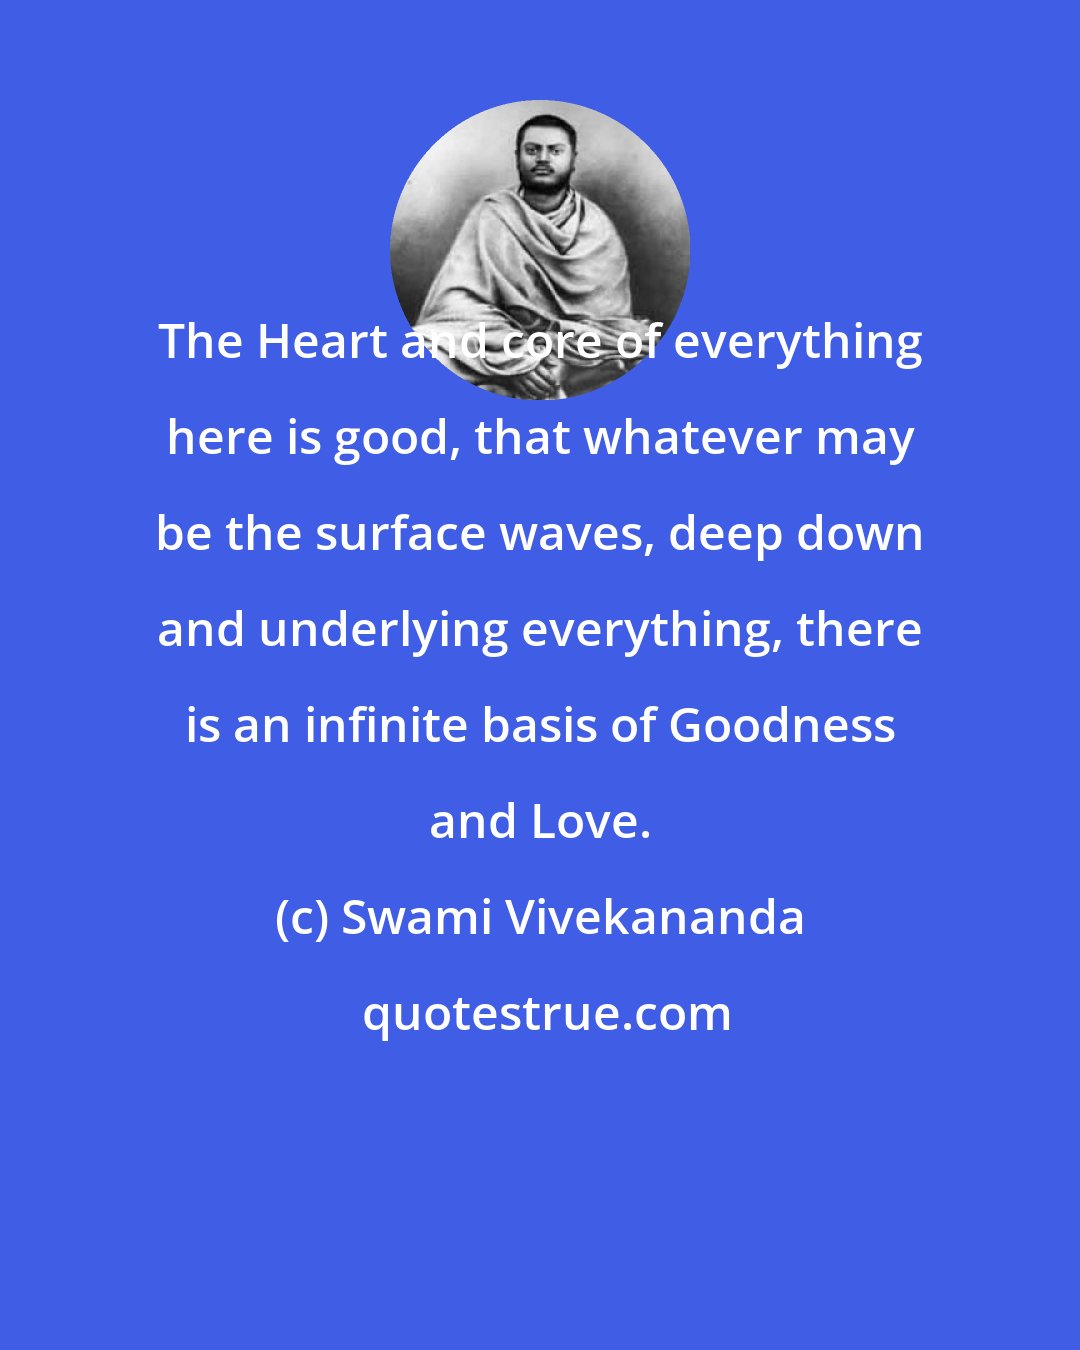 Swami Vivekananda: The Heart and core of everything here is good, that whatever may be the surface waves, deep down and underlying everything, there is an infinite basis of Goodness and Love.